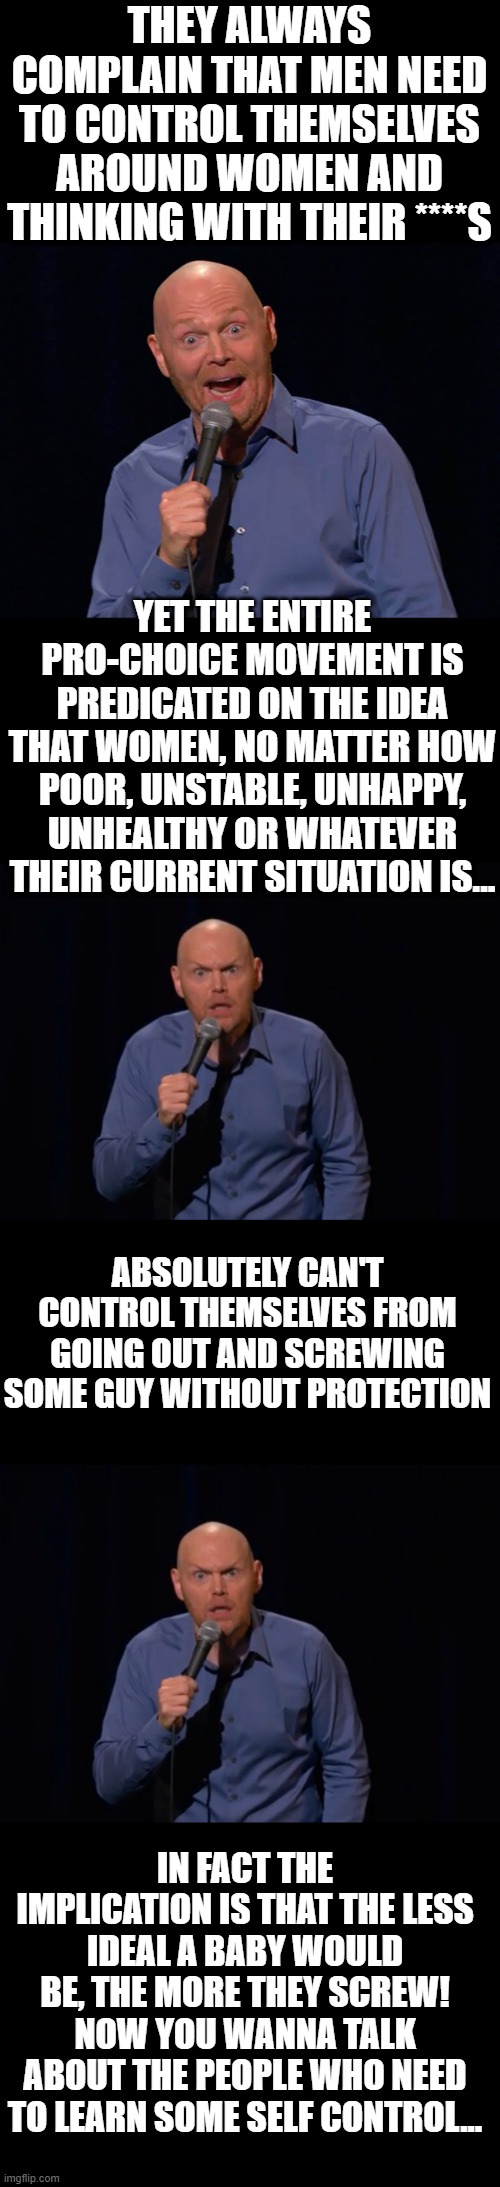 THEY ALWAYS COMPLAIN THAT MEN NEED TO CONTROL THEMSELVES AROUND WOMEN AND THINKING WITH THEIR ****S; YET THE ENTIRE PRO-CHOICE MOVEMENT IS PREDICATED ON THE IDEA THAT WOMEN, NO MATTER HOW POOR, UNSTABLE, UNHAPPY, UNHEALTHY OR WHATEVER THEIR CURRENT SITUATION IS... ABSOLUTELY CAN'T CONTROL THEMSELVES FROM GOING OUT AND SCREWING SOME GUY WITHOUT PROTECTION; IN FACT THE IMPLICATION IS THAT THE LESS IDEAL A BABY WOULD BE, THE MORE THEY SCREW! NOW YOU WANNA TALK ABOUT THE PEOPLE WHO NEED TO LEARN SOME SELF CONTROL... | image tagged in comedian bill burr '92 nominated for grammy award - emerson toda,bill burr is it really - tm | made w/ Imgflip meme maker